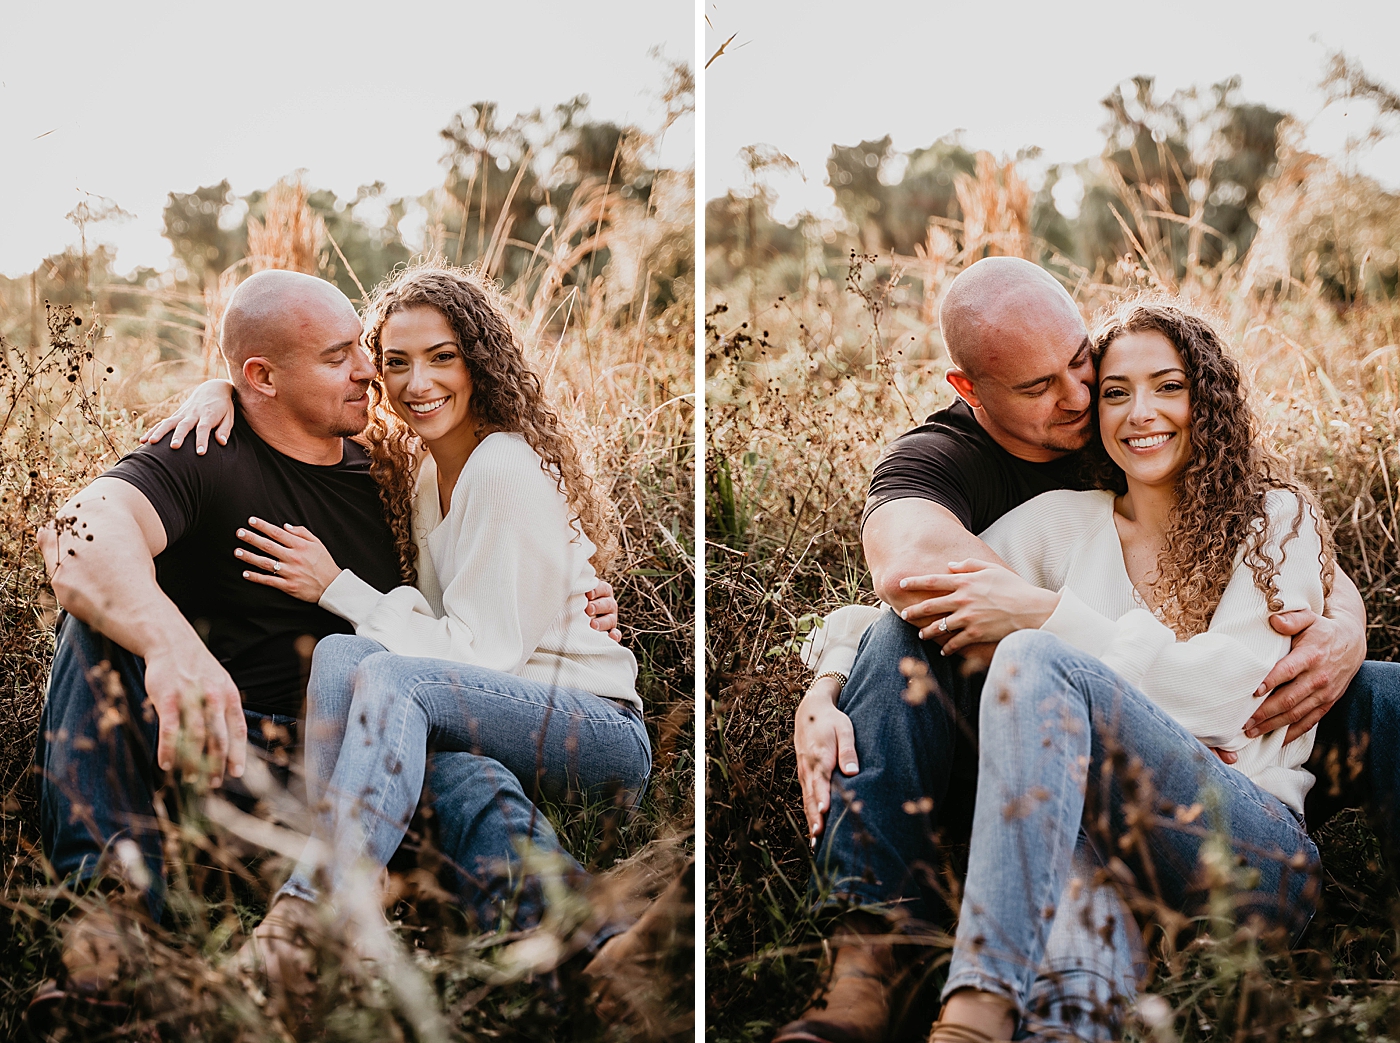 Couple hugging and sitting on grassy field Romantic Riverbend Park Engagement Photography captured by South Florida Photographer Krystal Capone Photography